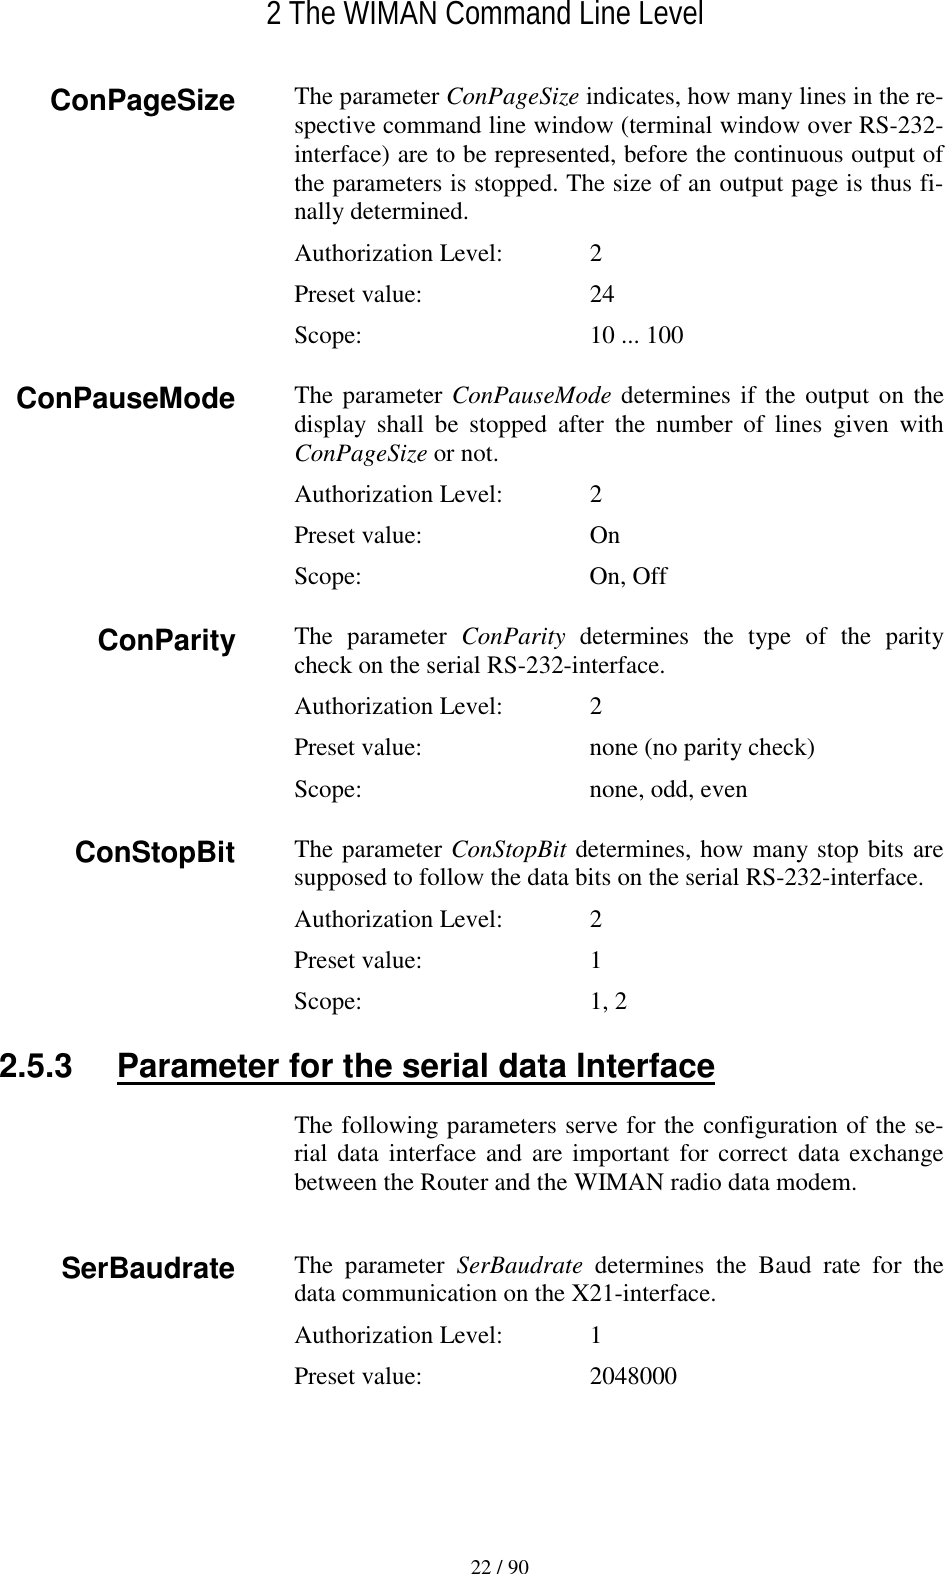   2 The WIMAN Command Line Level 22 / 90 The parameter ConPageSize indicates, how many lines in the re-spective command line window (terminal window over RS-232-interface) are to be represented, before the continuous output of the parameters is stopped. The size of an output page is thus fi-nally determined. Authorization Level:    2 Preset value:    24 Scope:    10 ... 100 The parameter ConPauseMode determines if the output on the display shall be stopped after the number of lines given with ConPageSize or not. Authorization Level:    2 Preset value:    On Scope:  On, Off The parameter ConParity determines the type of the parity check on the serial RS-232-interface. Authorization Level:    2 Preset value:    none (no parity check) Scope:    none, odd, even The parameter ConStopBit determines, how many stop bits are supposed to follow the data bits on the serial RS-232-interface. Authorization Level:    2 Preset value:    1 Scope:  1, 2 2.5.3  Parameter for the serial data Interface The following parameters serve for the configuration of the se-rial data interface and are important for correct data exchange between the Router and the WIMAN radio data modem.  The parameter SerBaudrate determines the Baud rate for the data communication on the X21-interface. Authorization Level:    1 Preset value:    2048000 SerBaudrate ConParity ConStopBit ConPageSize ConPauseMode 